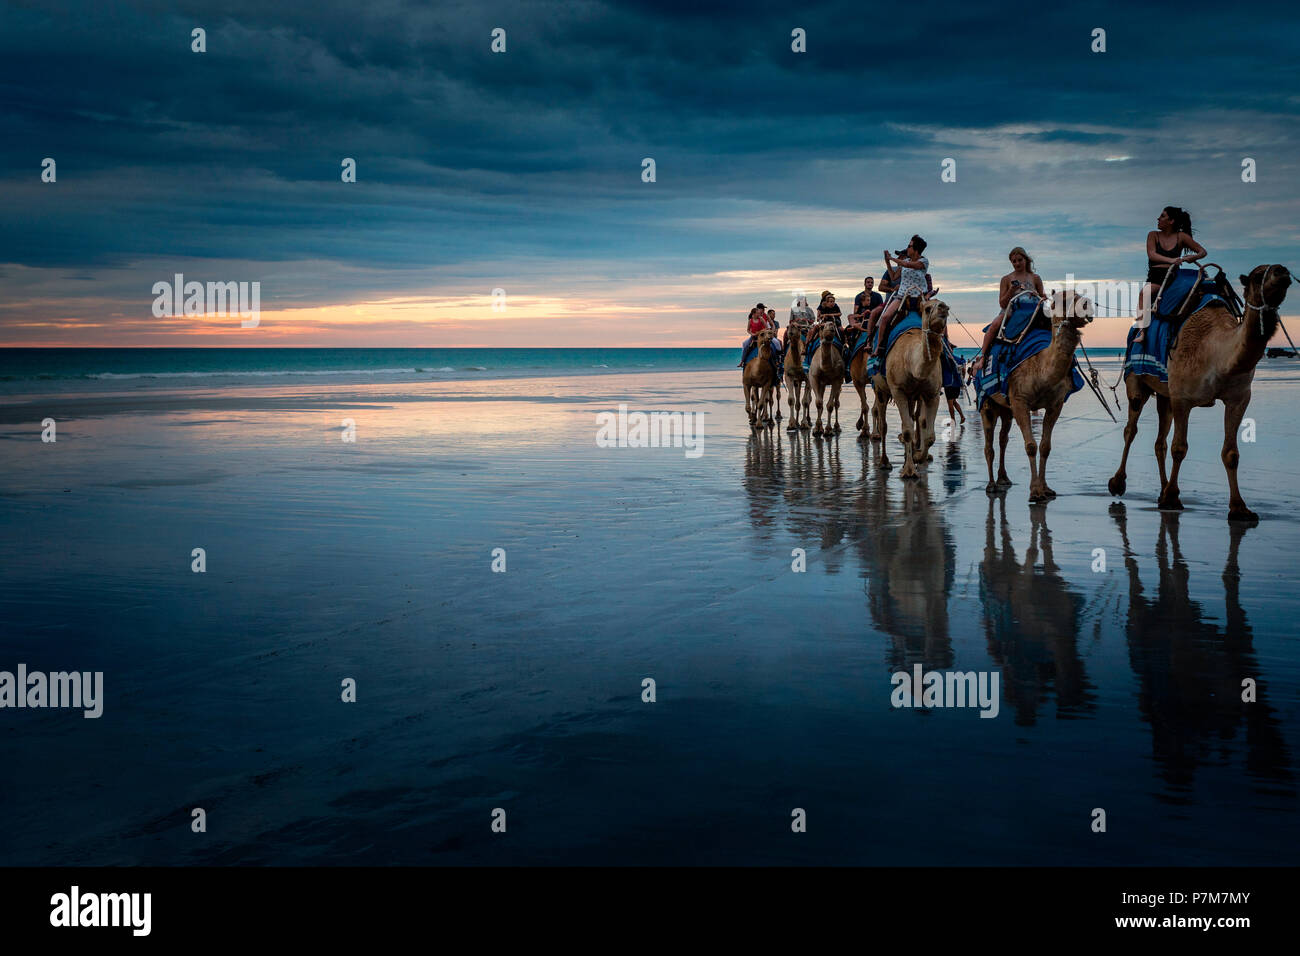 Camel tour ride at Cable Beach, Broome, Kimberley, Western Australia Stock Photo